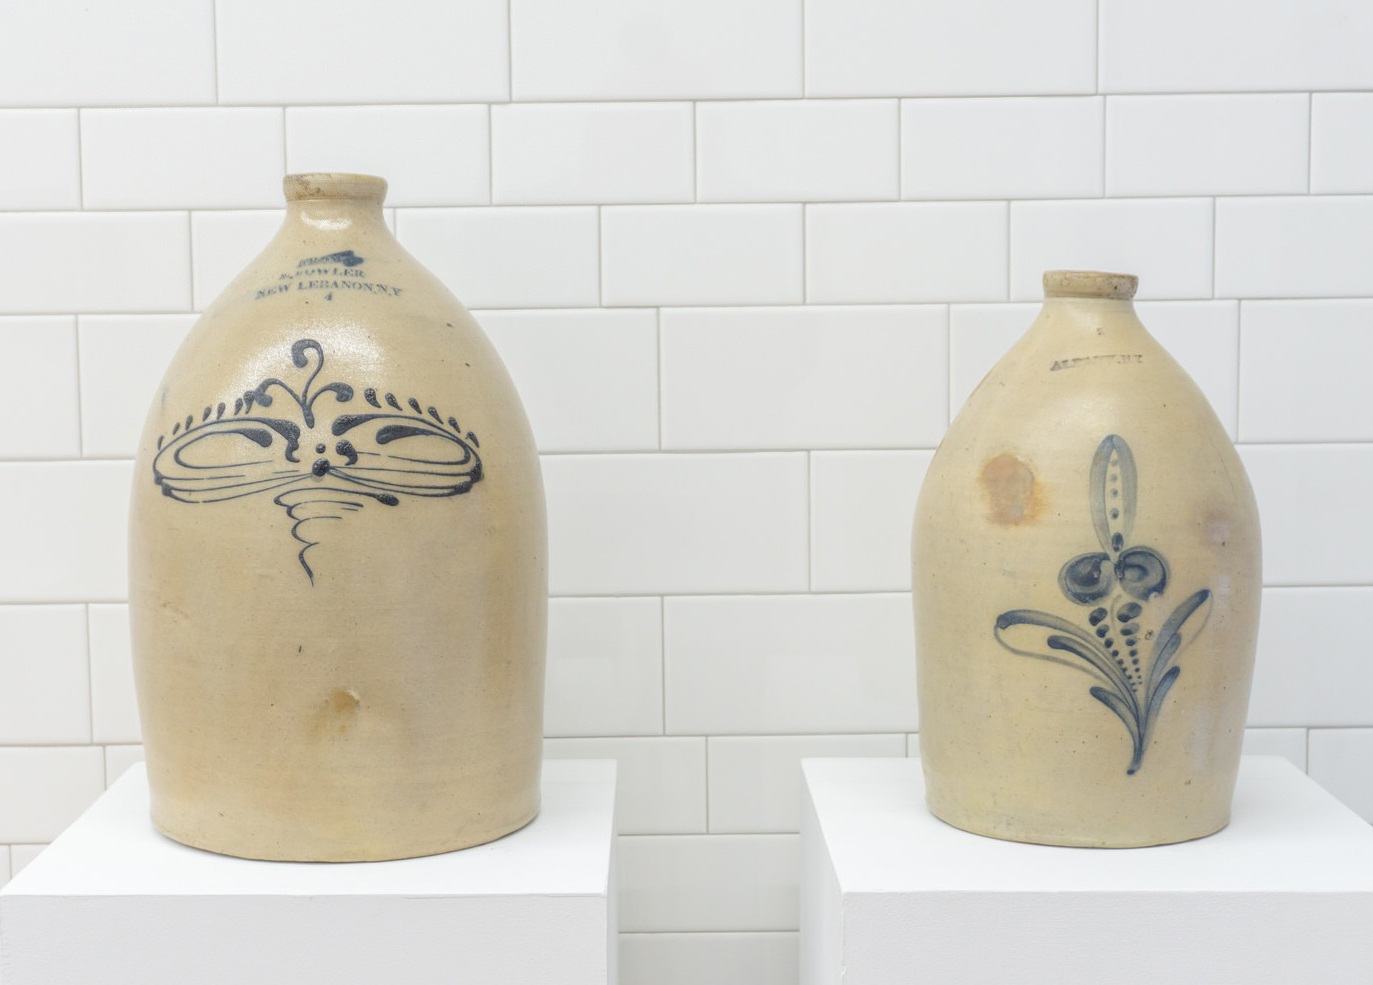 Two jugs with designs on them sit on a white tiled wall.